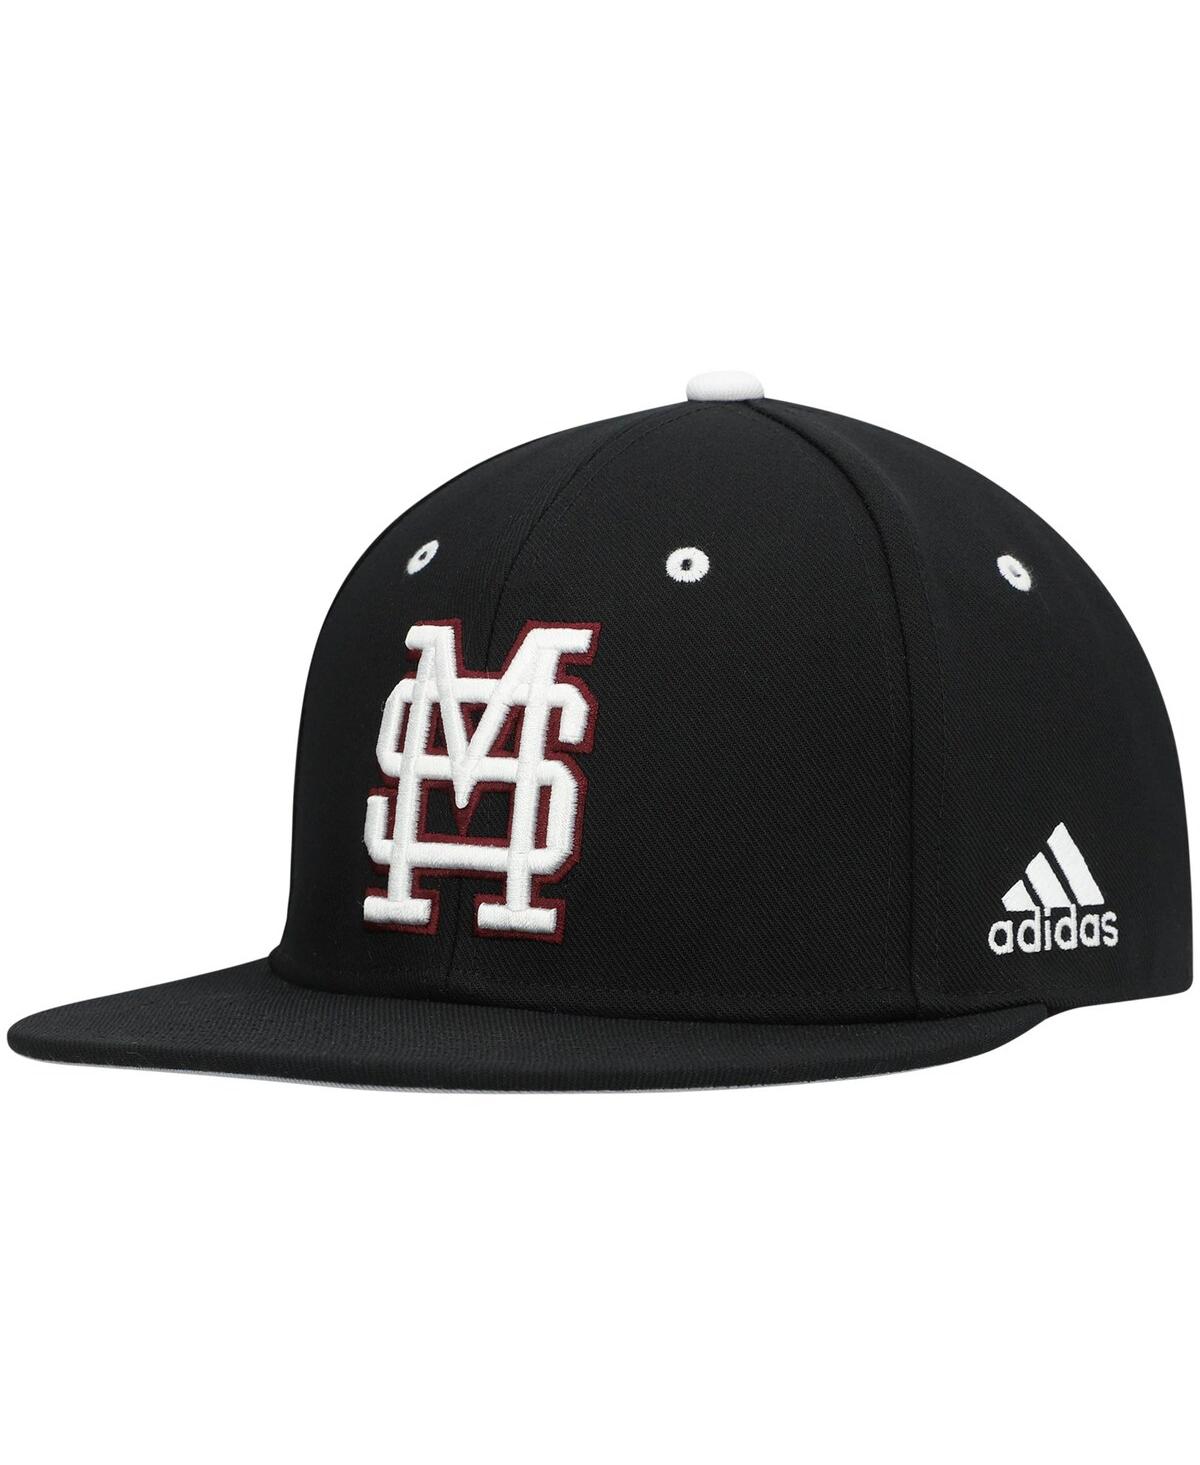 Shop Adidas Originals Men's Adidas Black Mississippi State Bulldogs On-field Baseball Fitted Hat